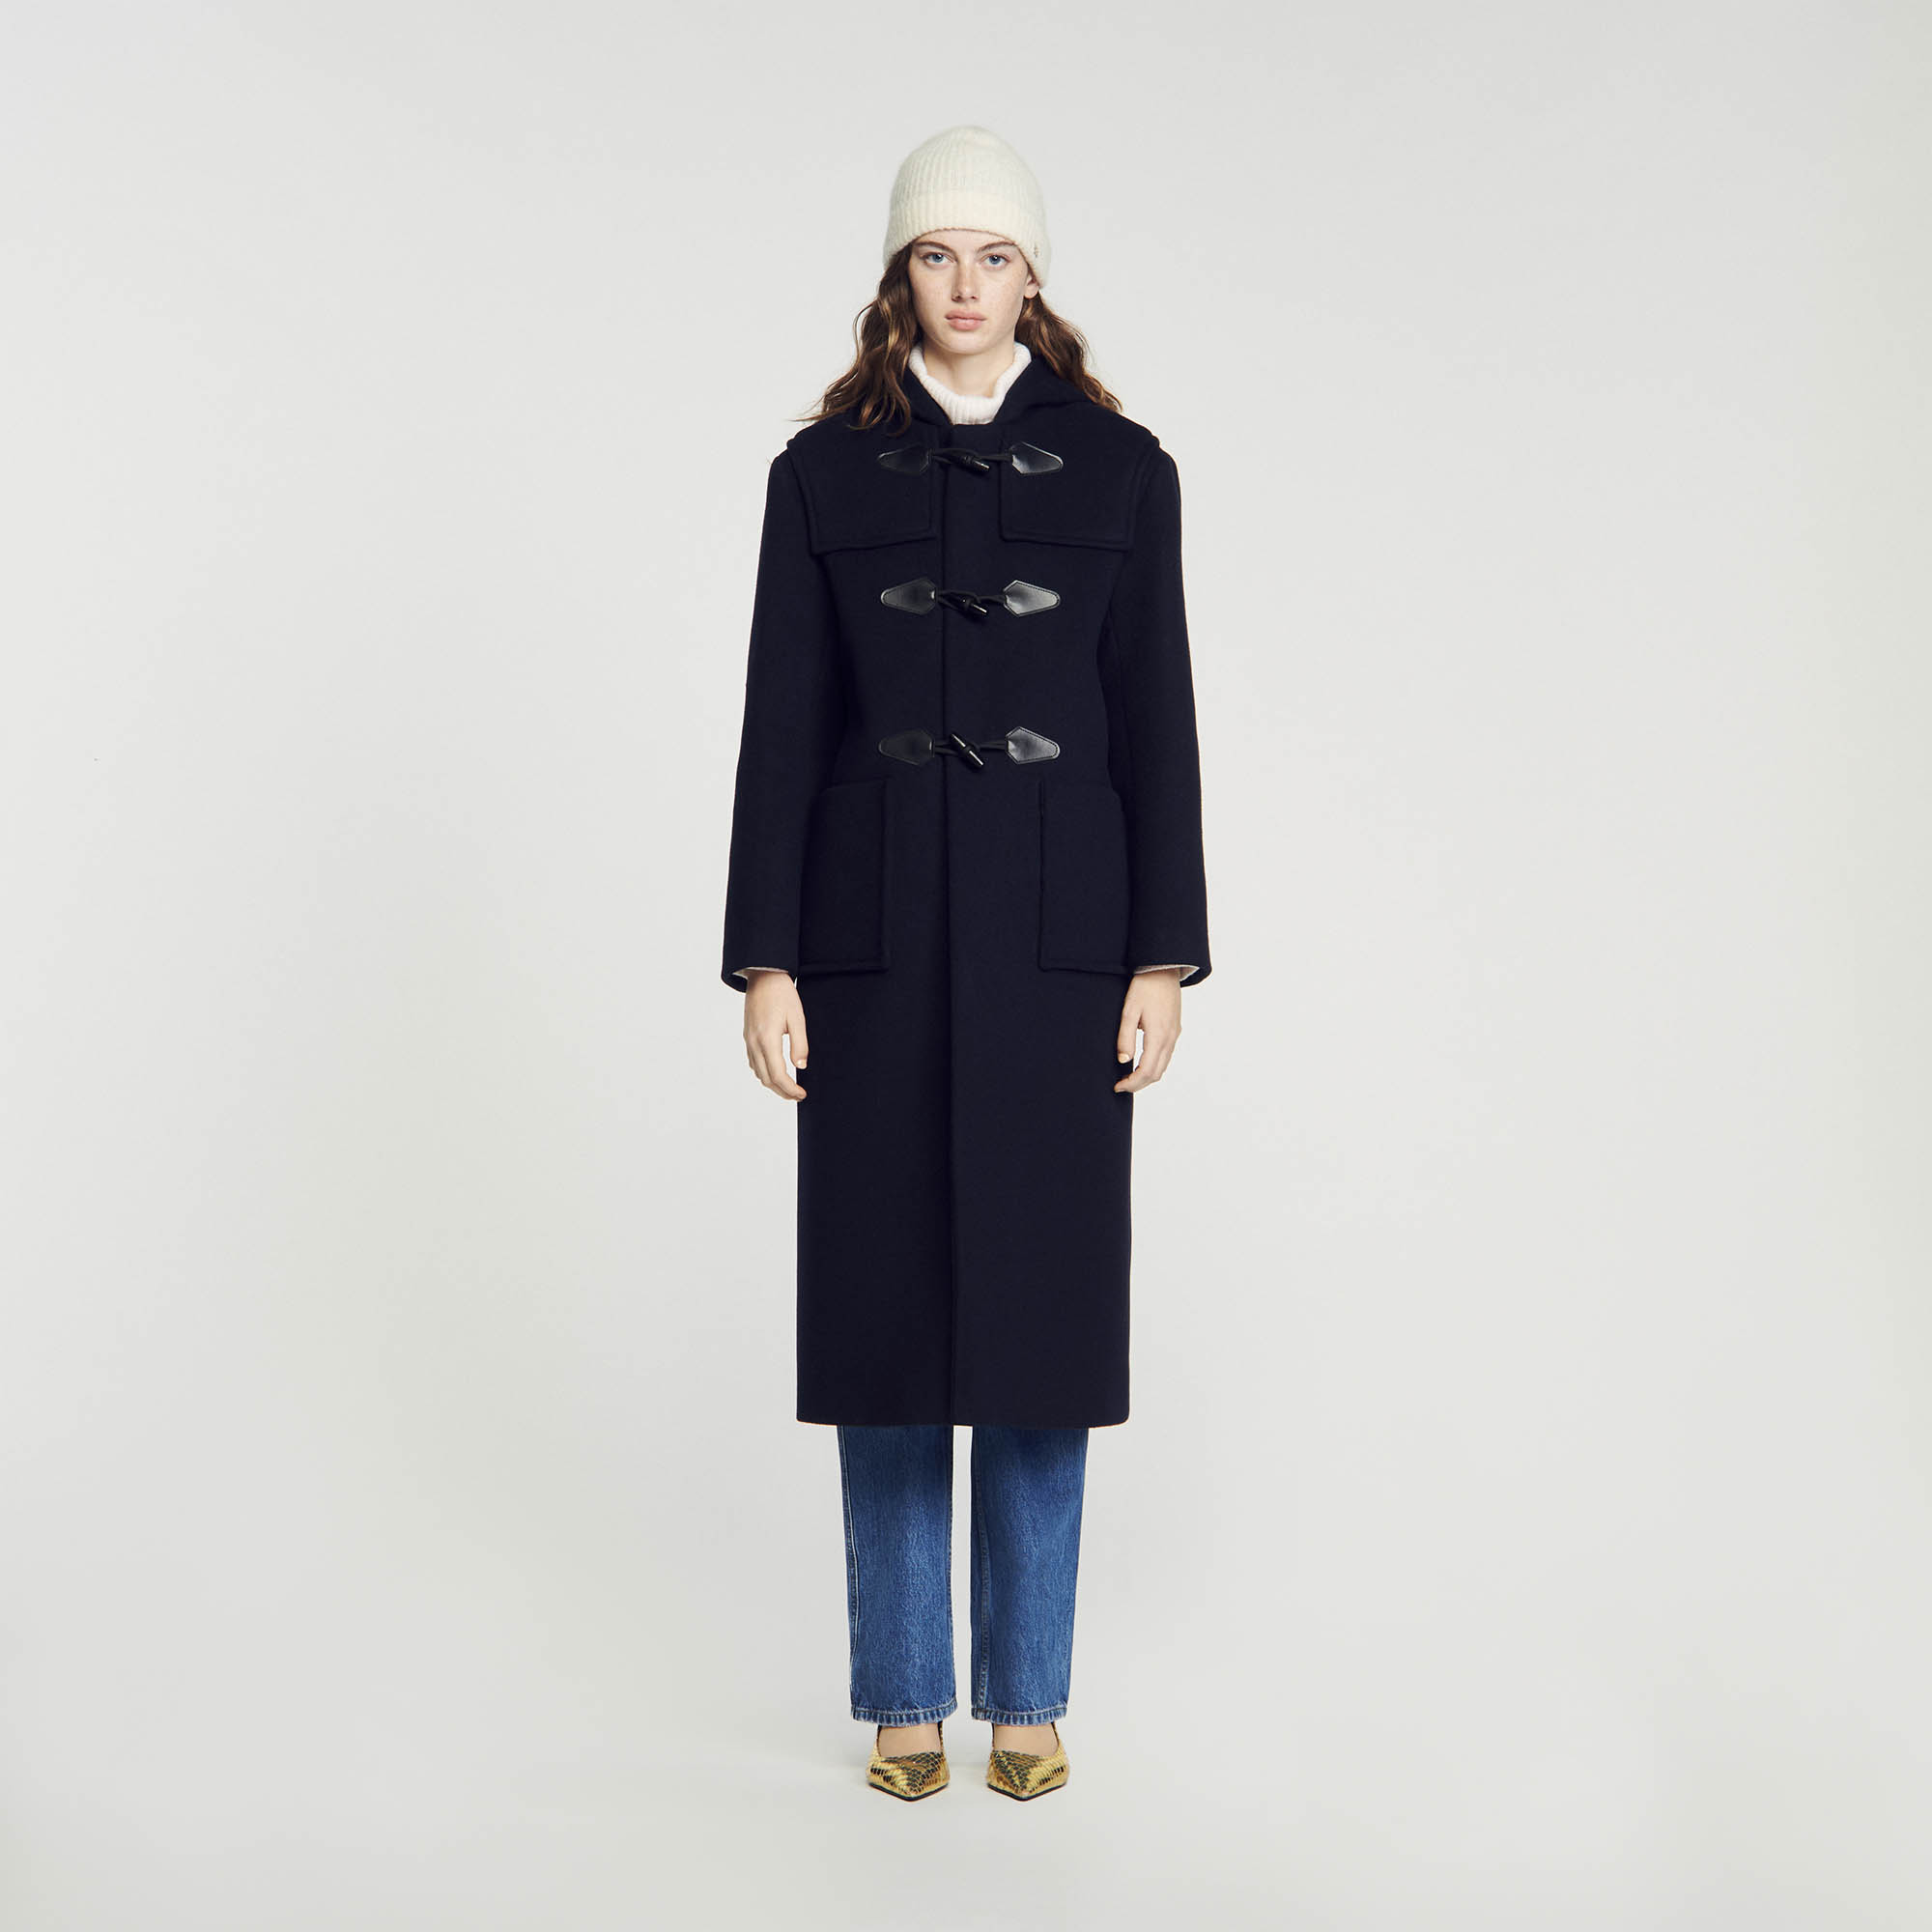 Sandro wool Long-sleeved wool-blend duffle coat with hood, toggle fastening, embellished with shoulder panels and large patch pockets